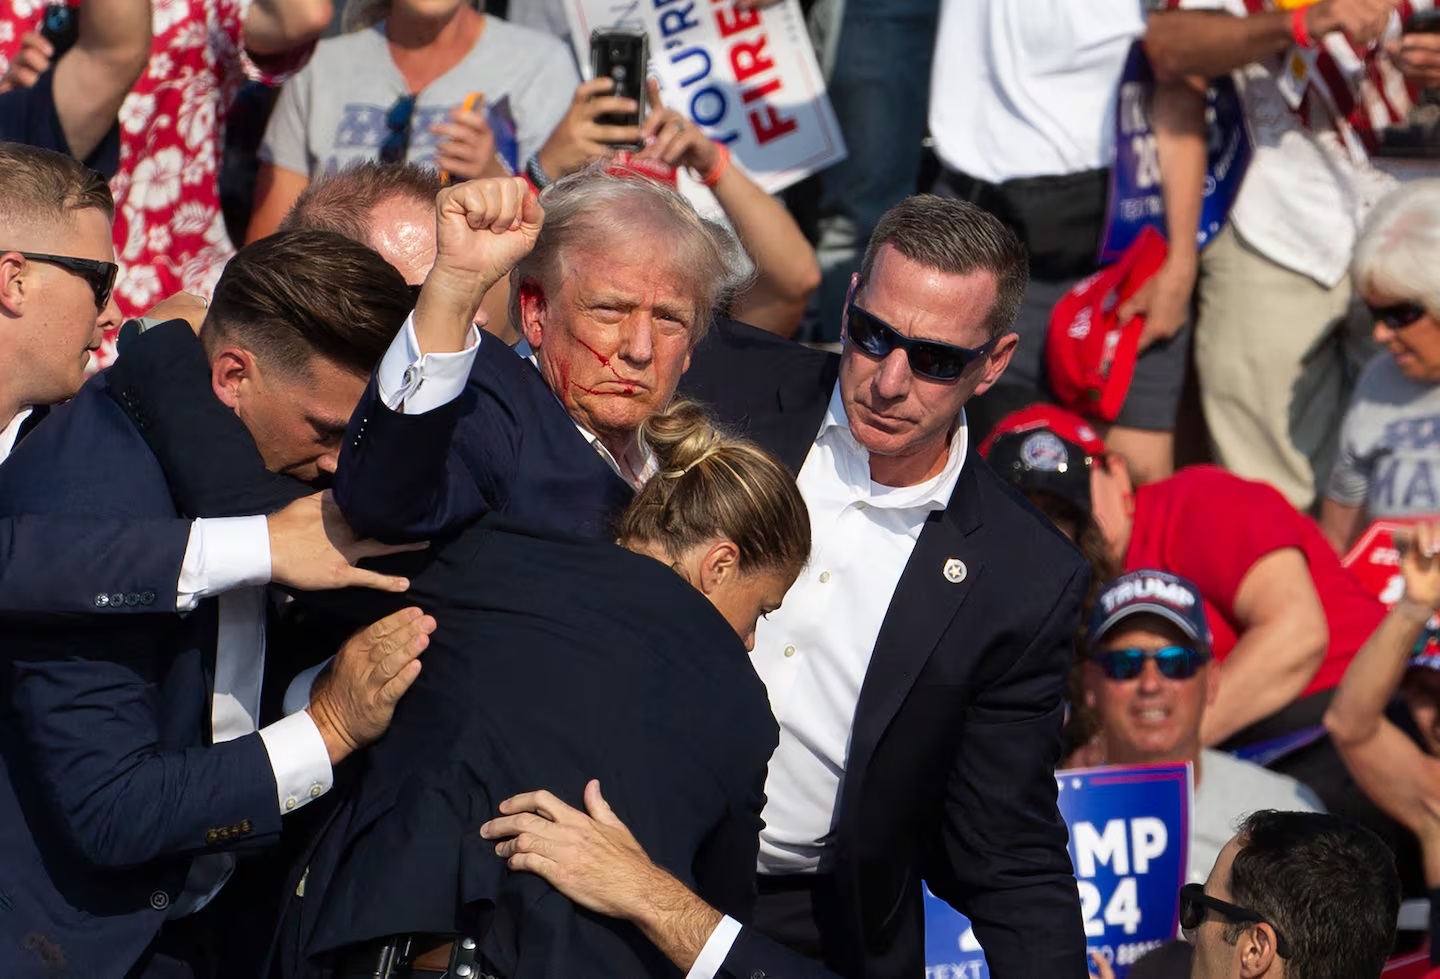 Breaking news: Trump has been shot at a campaign rally in Pennsylvania - Adela Journal - News from around the World